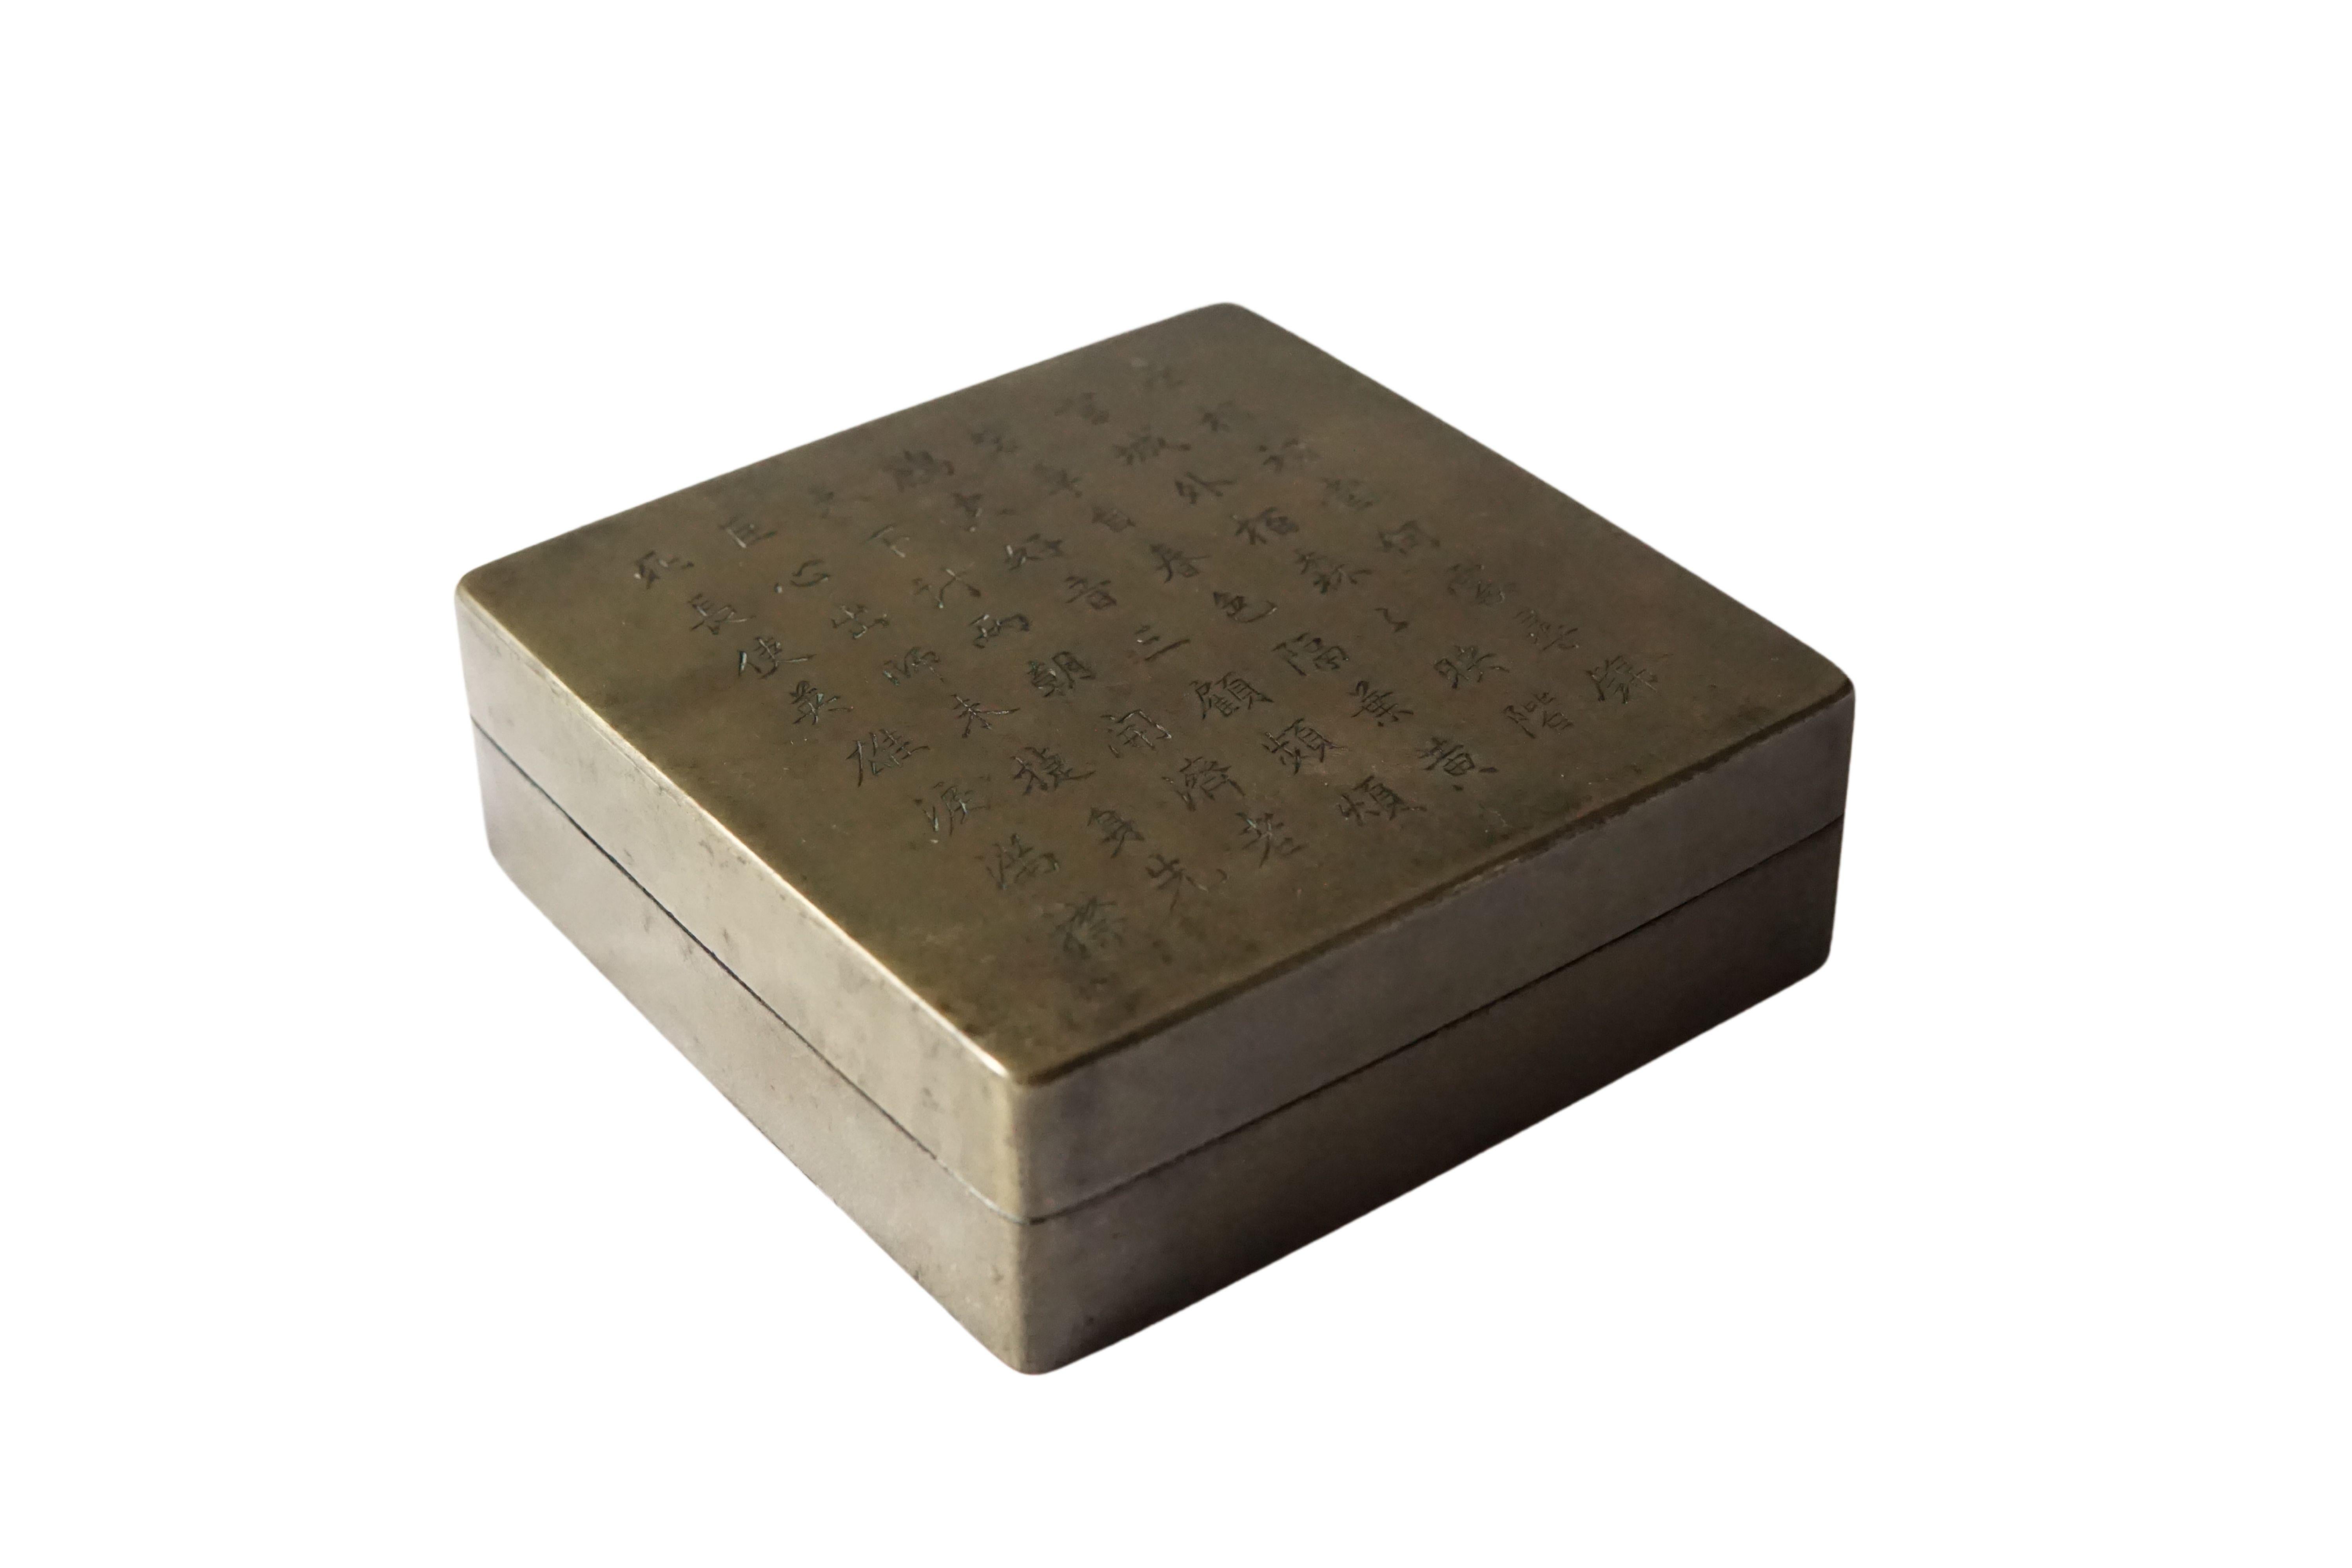 A Chinese Ink Box crafted from bronze, with engraved Chinese characters from the early 20th century. This item may also be used to store a collection of small items or even be used as a jewellery box.